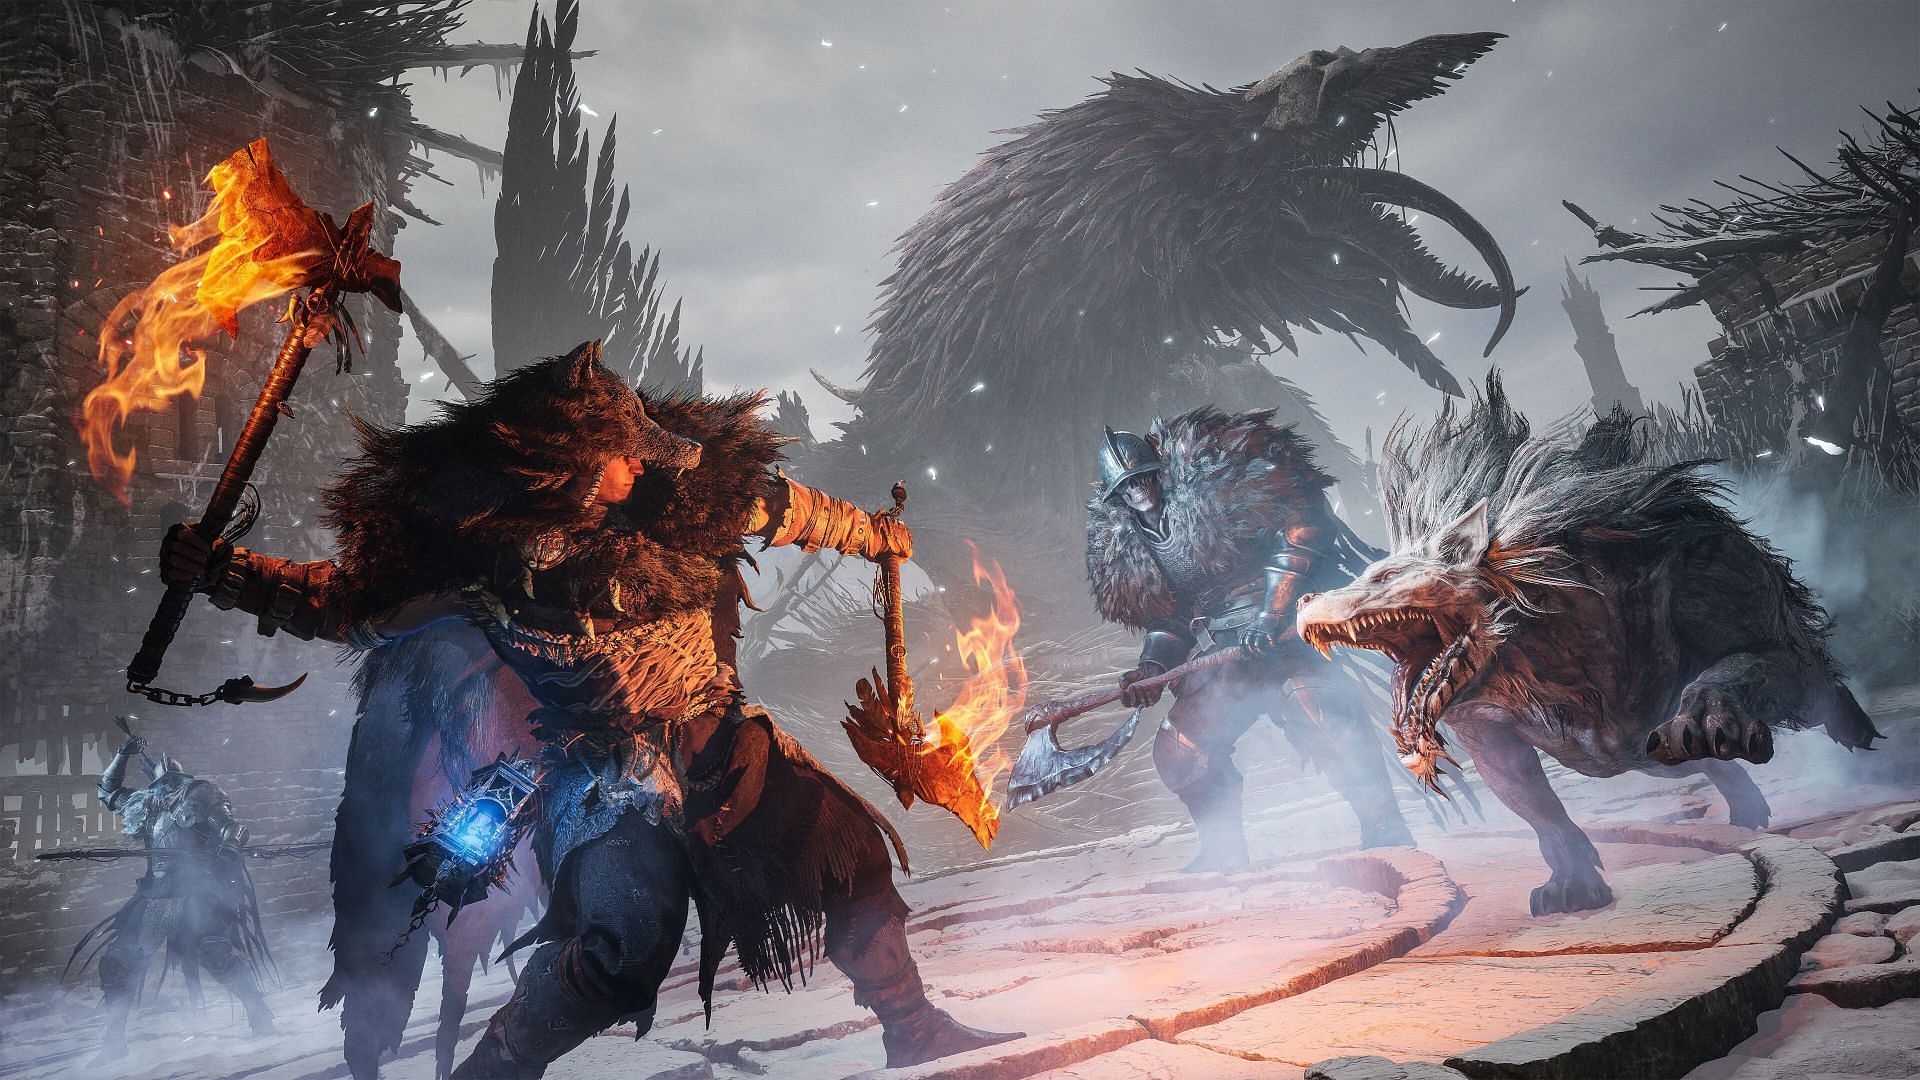 The starting classes play a pivotal role in shaping your playstyle in The Lords of the Fallen (Image via CI Games)